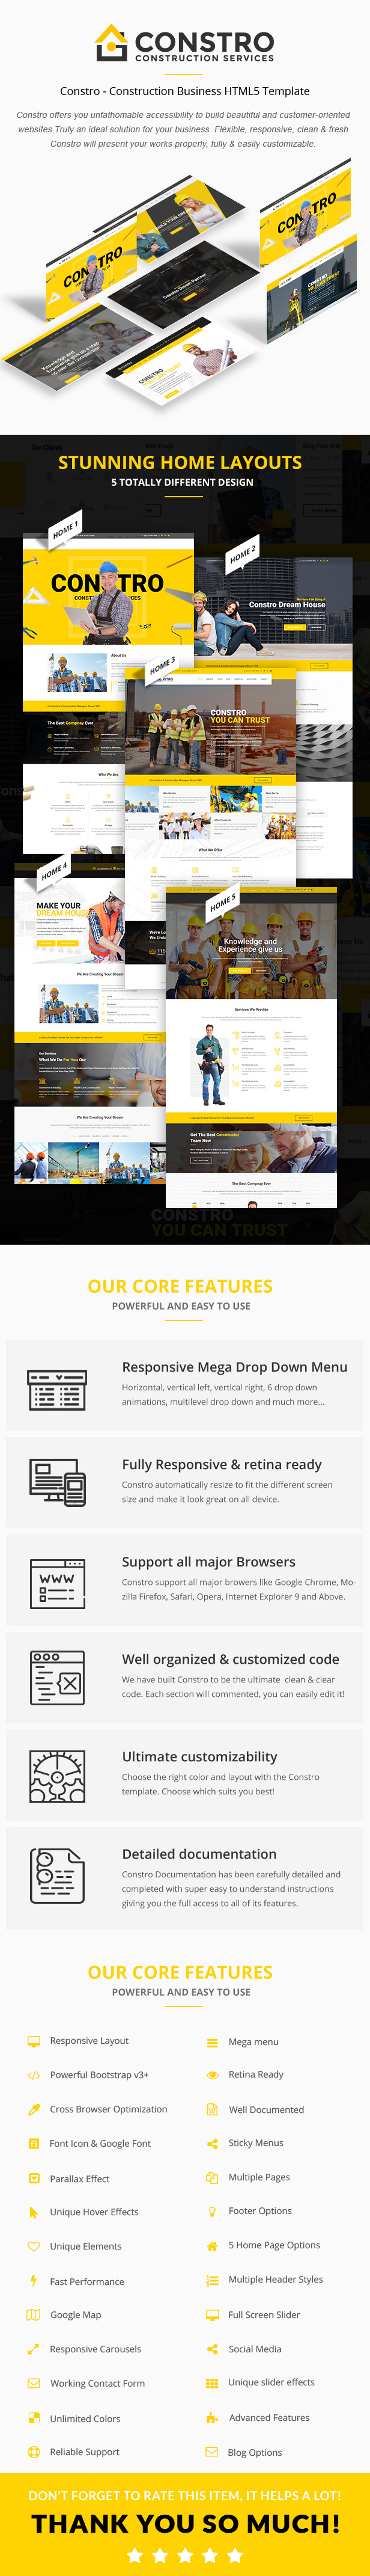 Constro - Construction Business HTML5 Template - 3